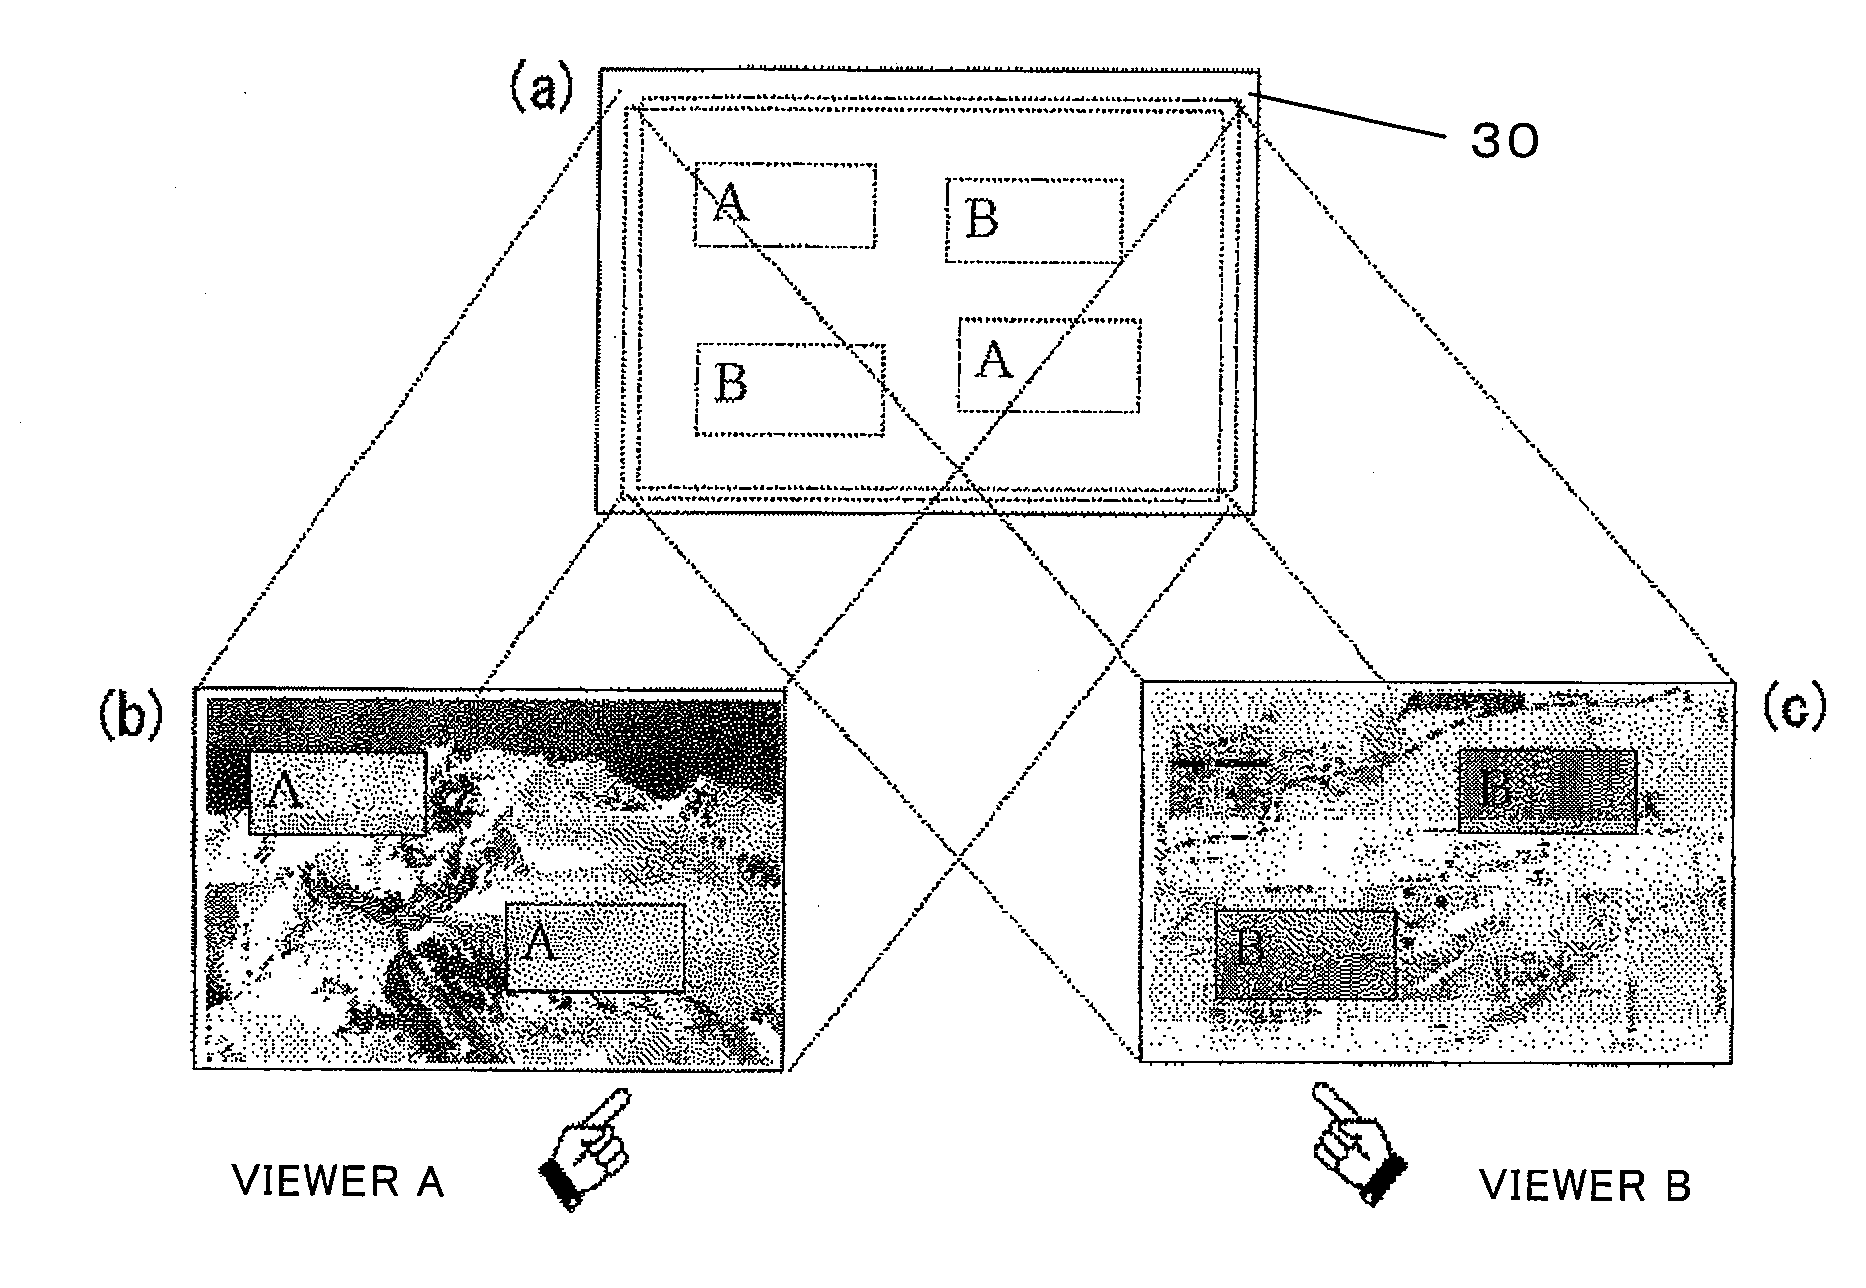 Display system and image processing apparatus